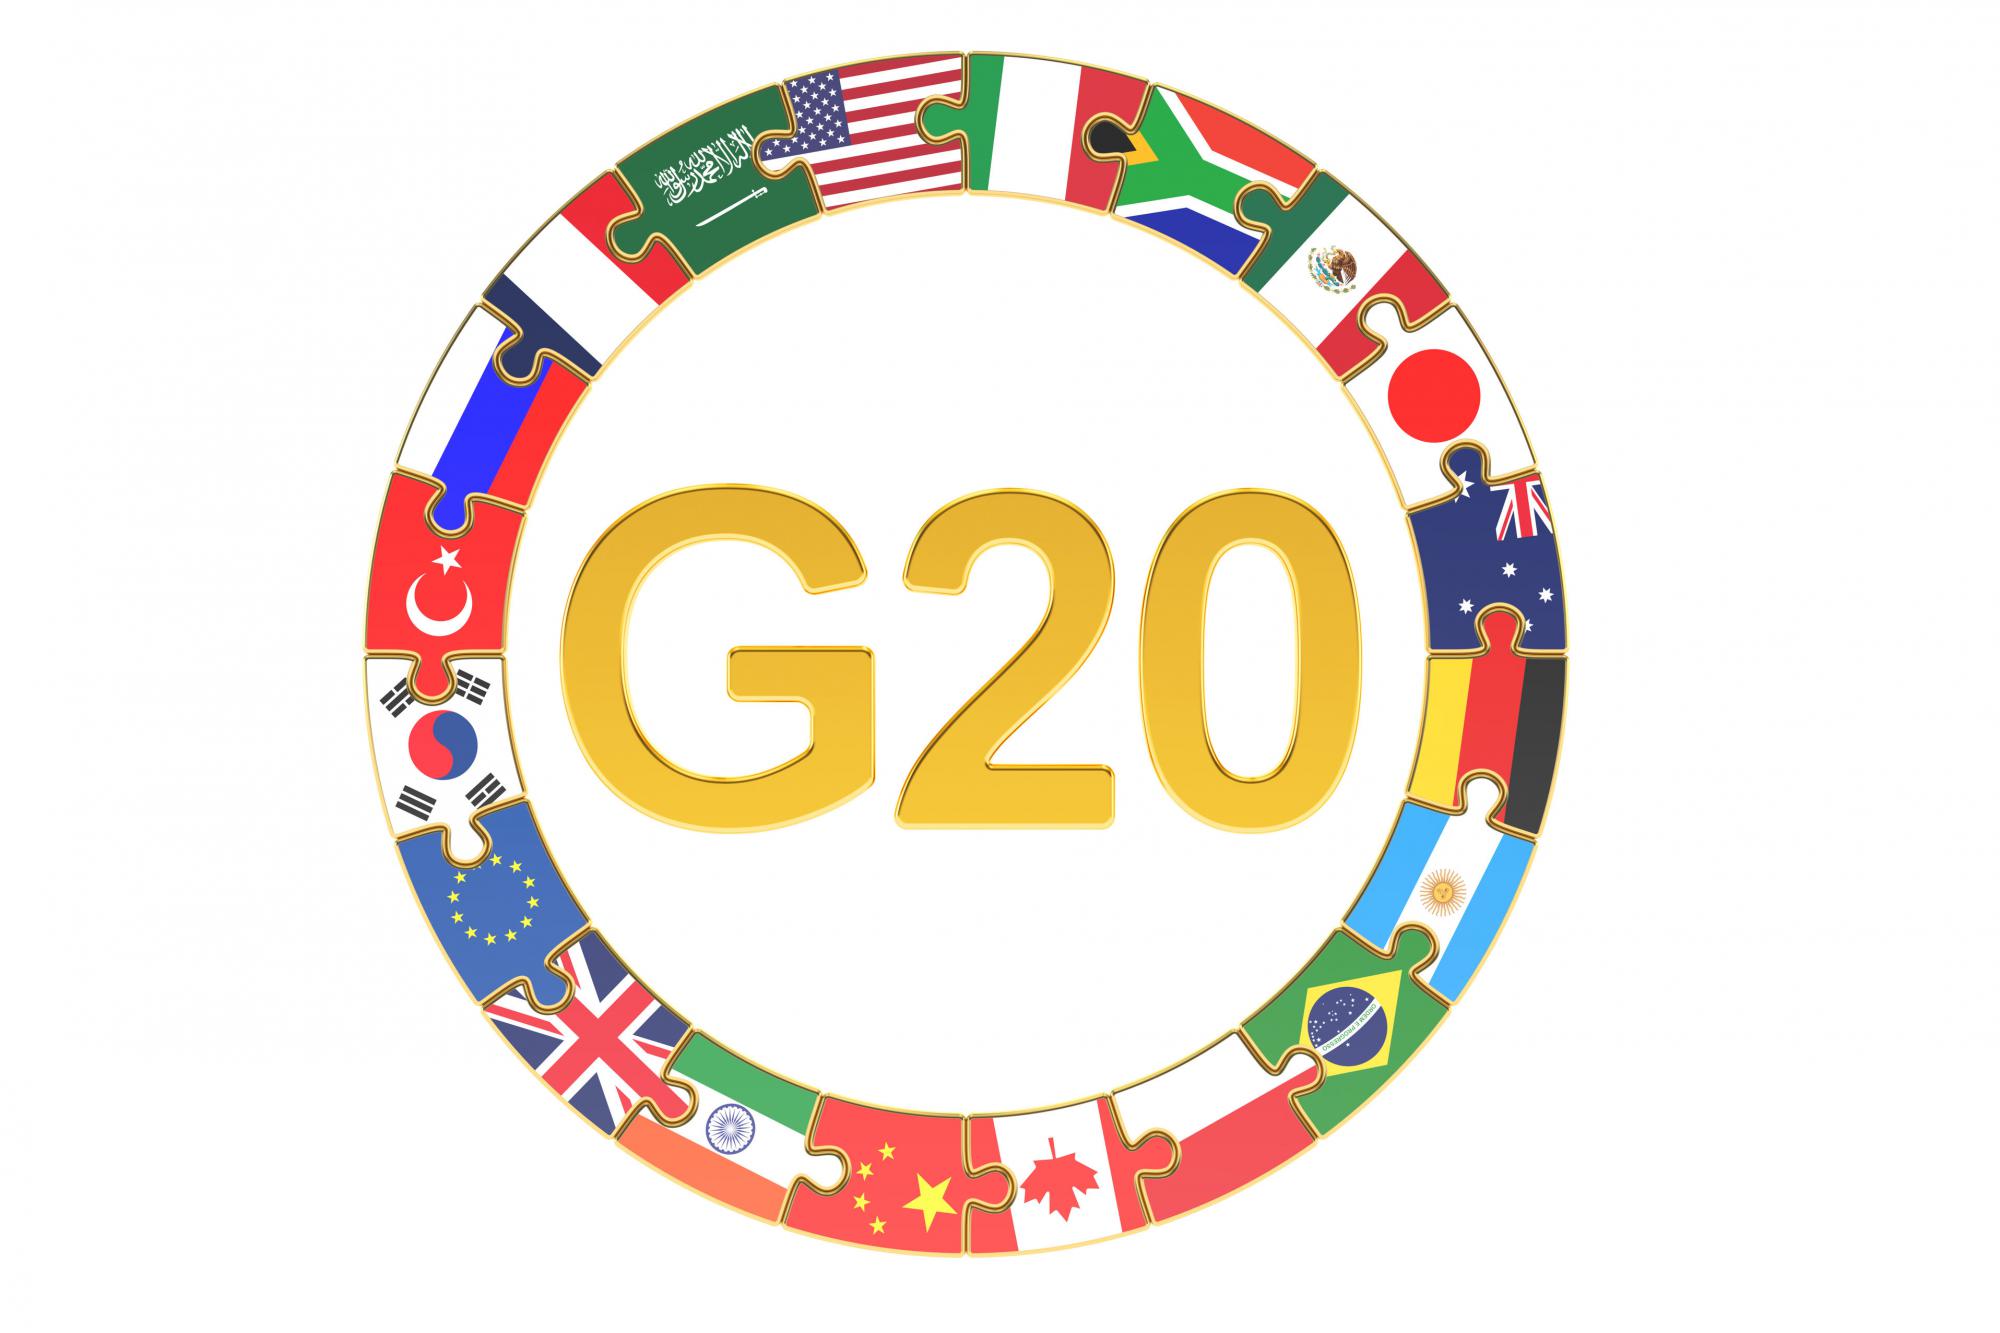 G20 agrees to 'monitor' cryptocurrencies but no action yet